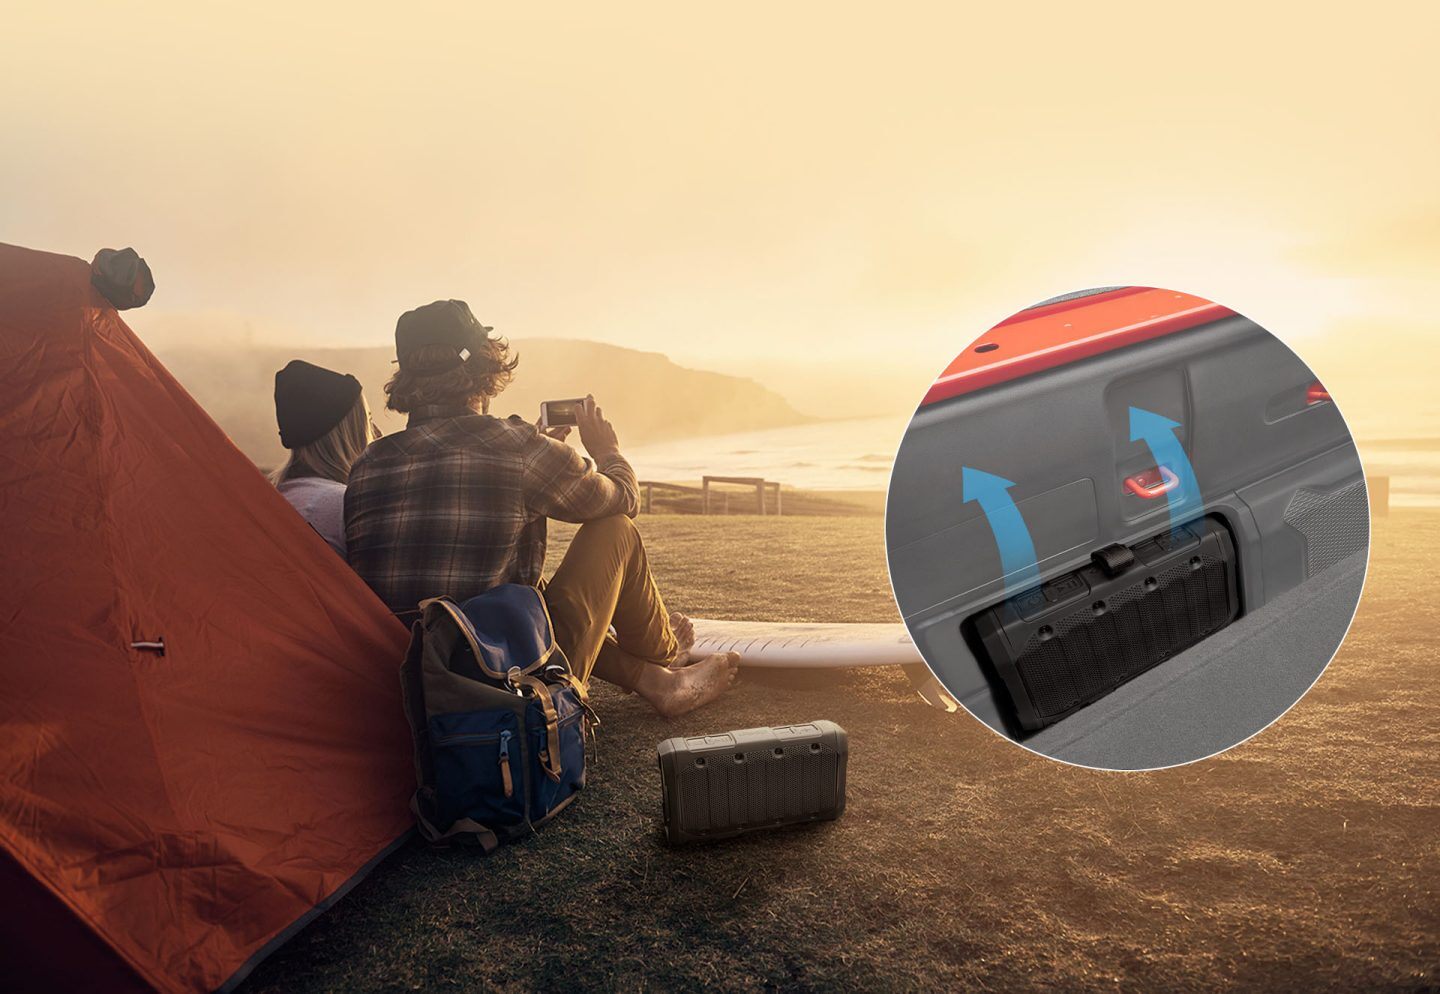 A couple on the beach with a Bluetooth speaker beside them, as well as an inset image showing where the speaker fits into the side of the 2022 Jeep Gladiator truck bed.